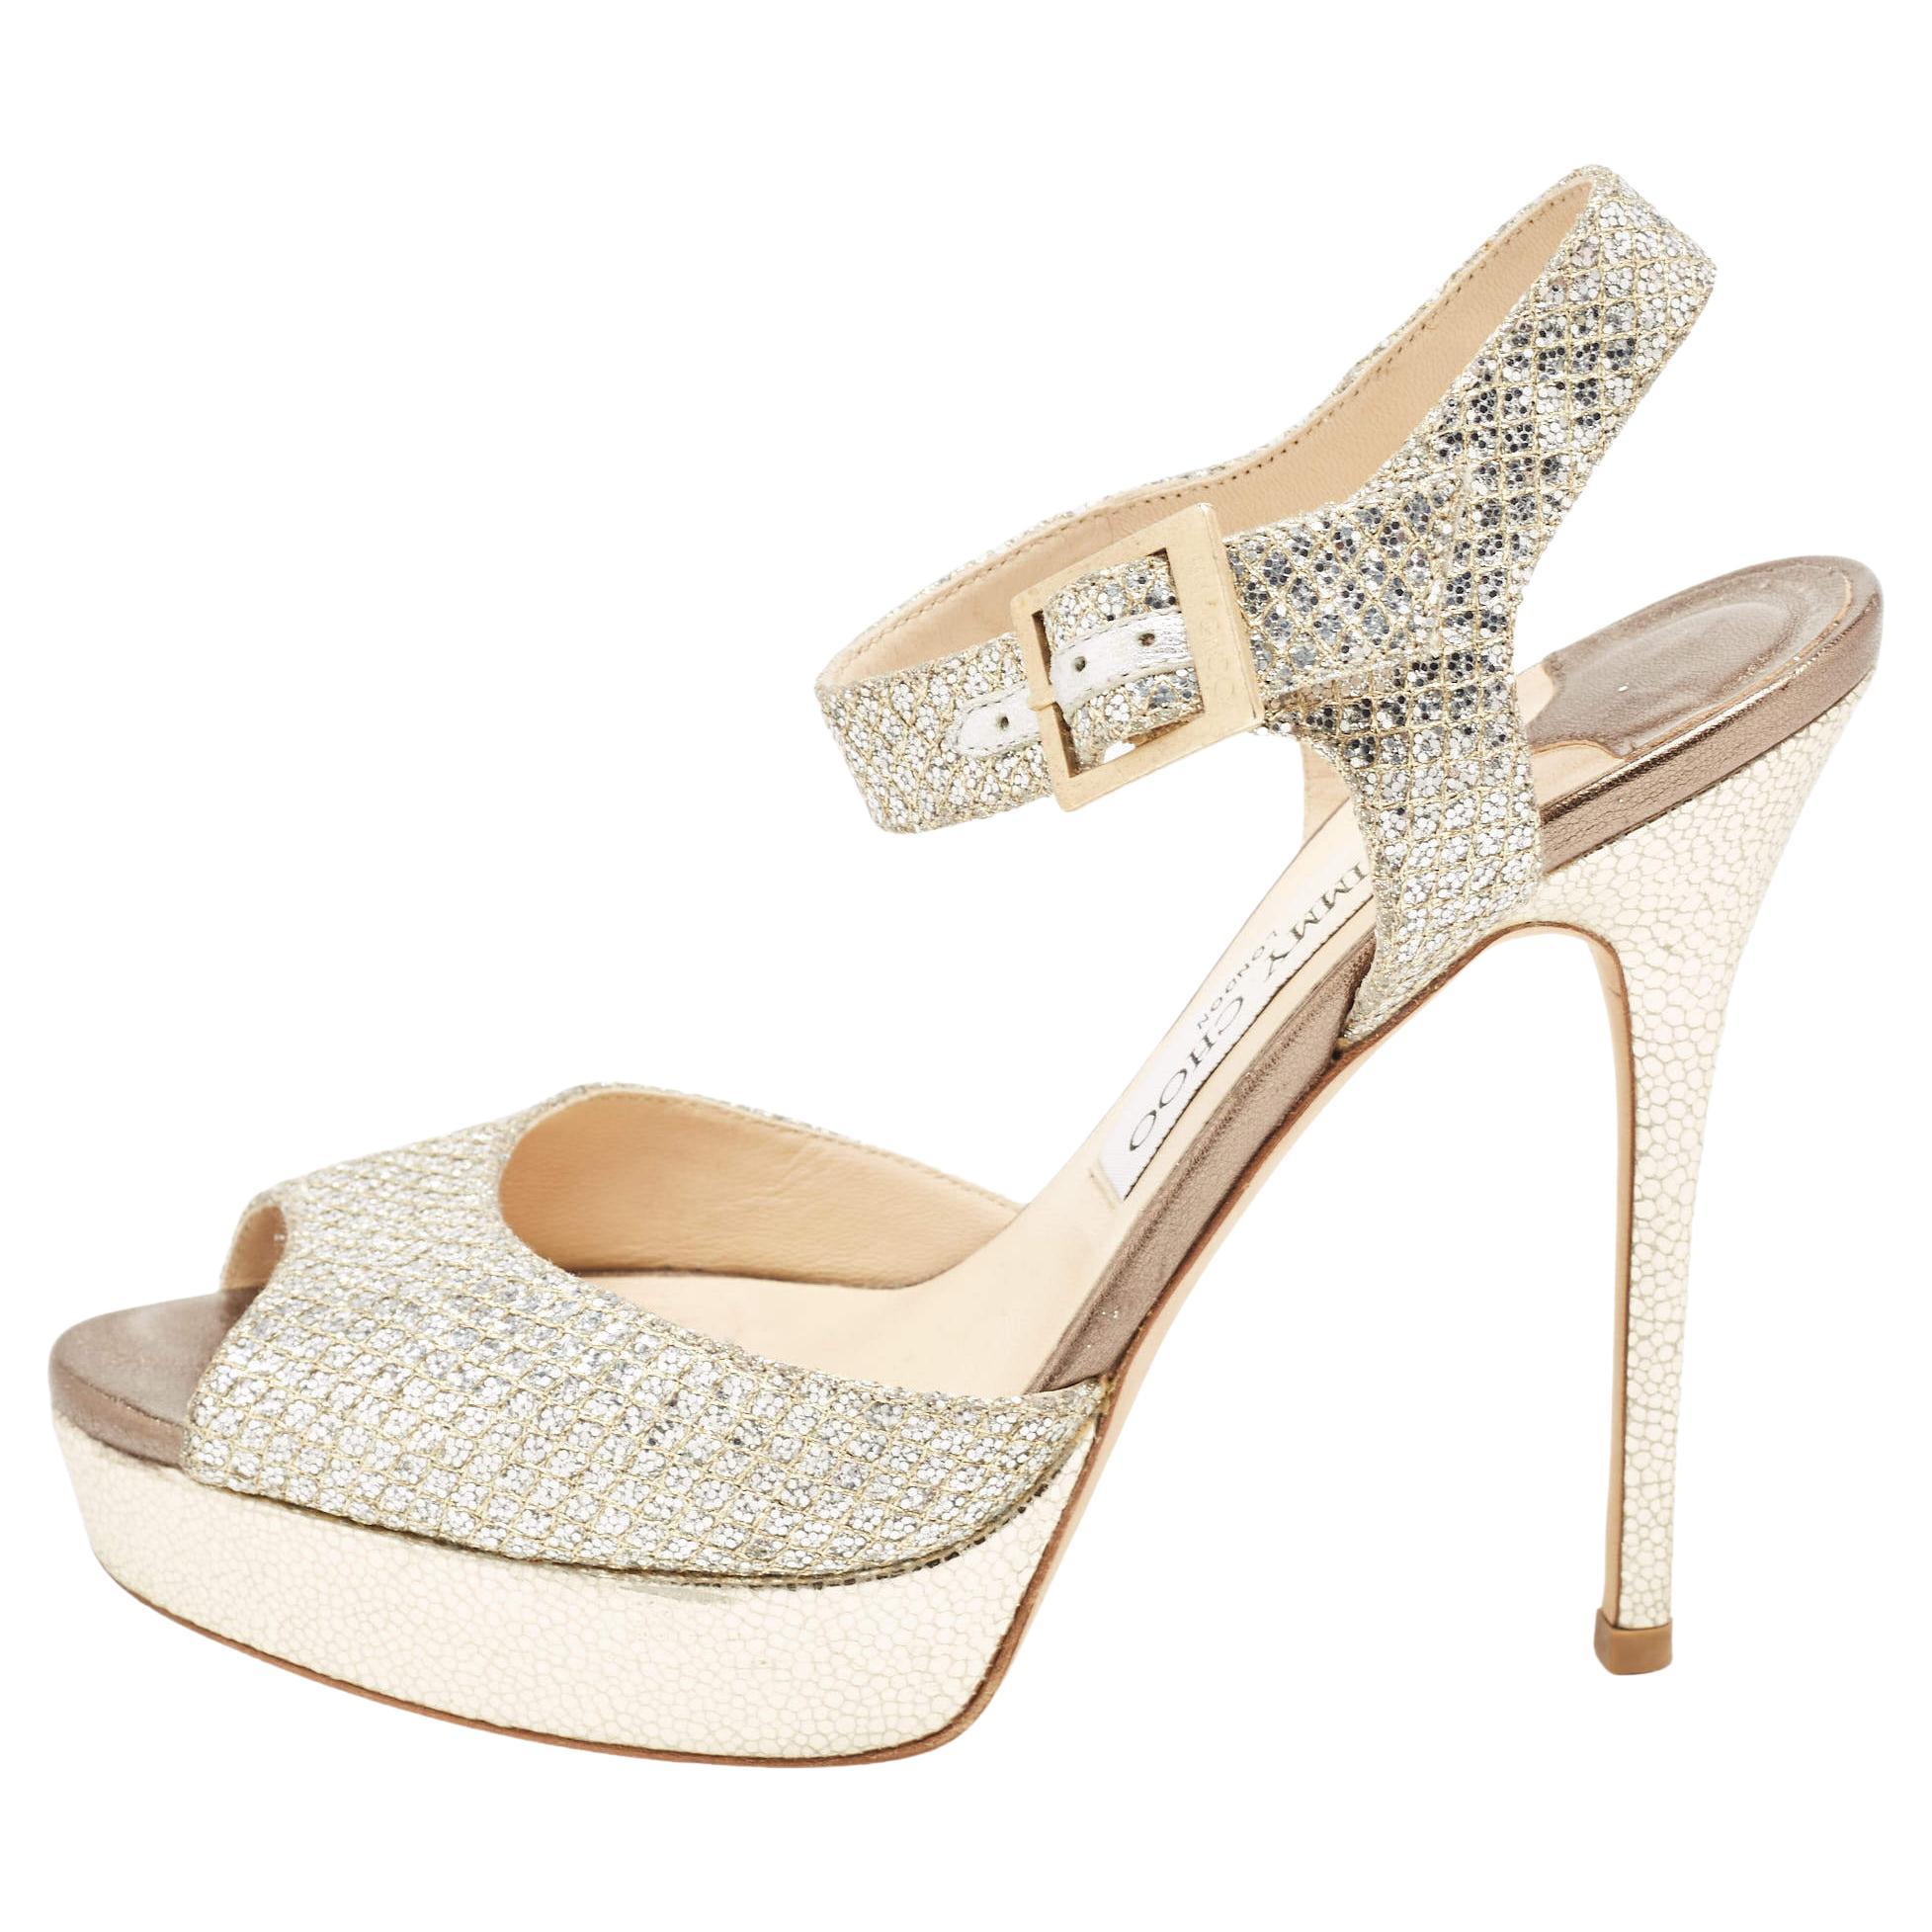 Jimmy Choo Silver/Gold Glitter and Leather Platform Ankle Strap Sandals Size 38. For Sale